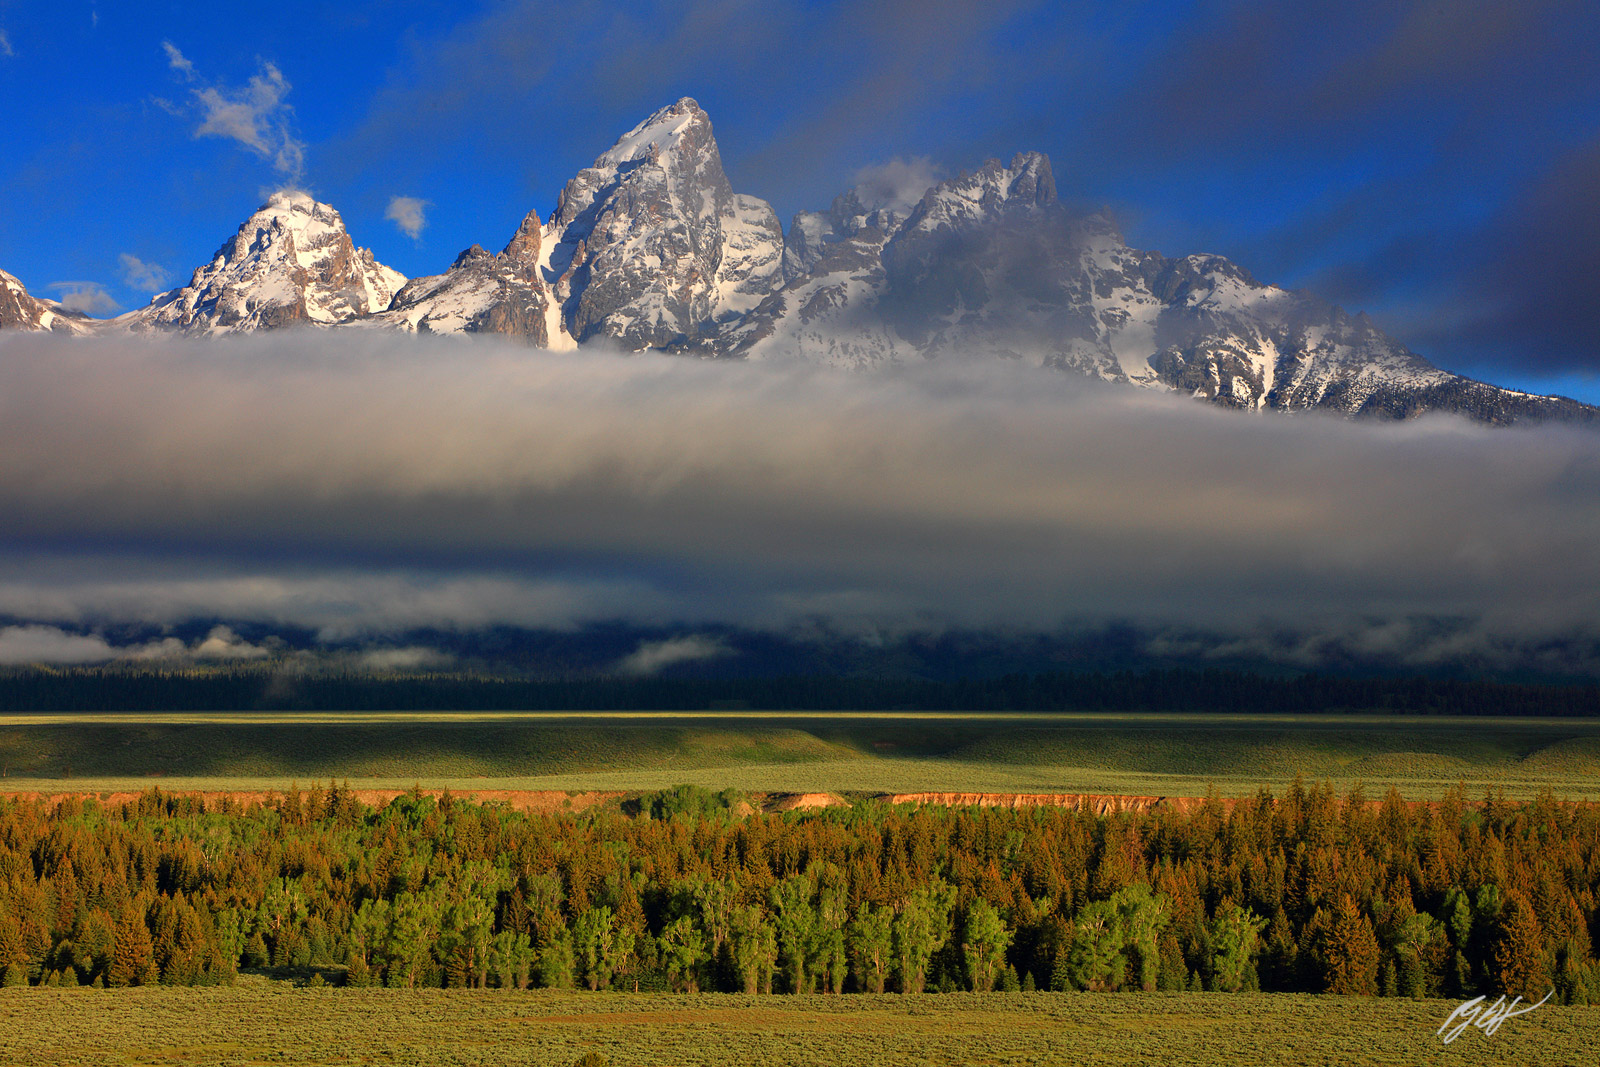 The Grand Tetons Rise above the Clouds in Morning Light Viewed from Teton Point in Grand Teton National Park in Wyoming